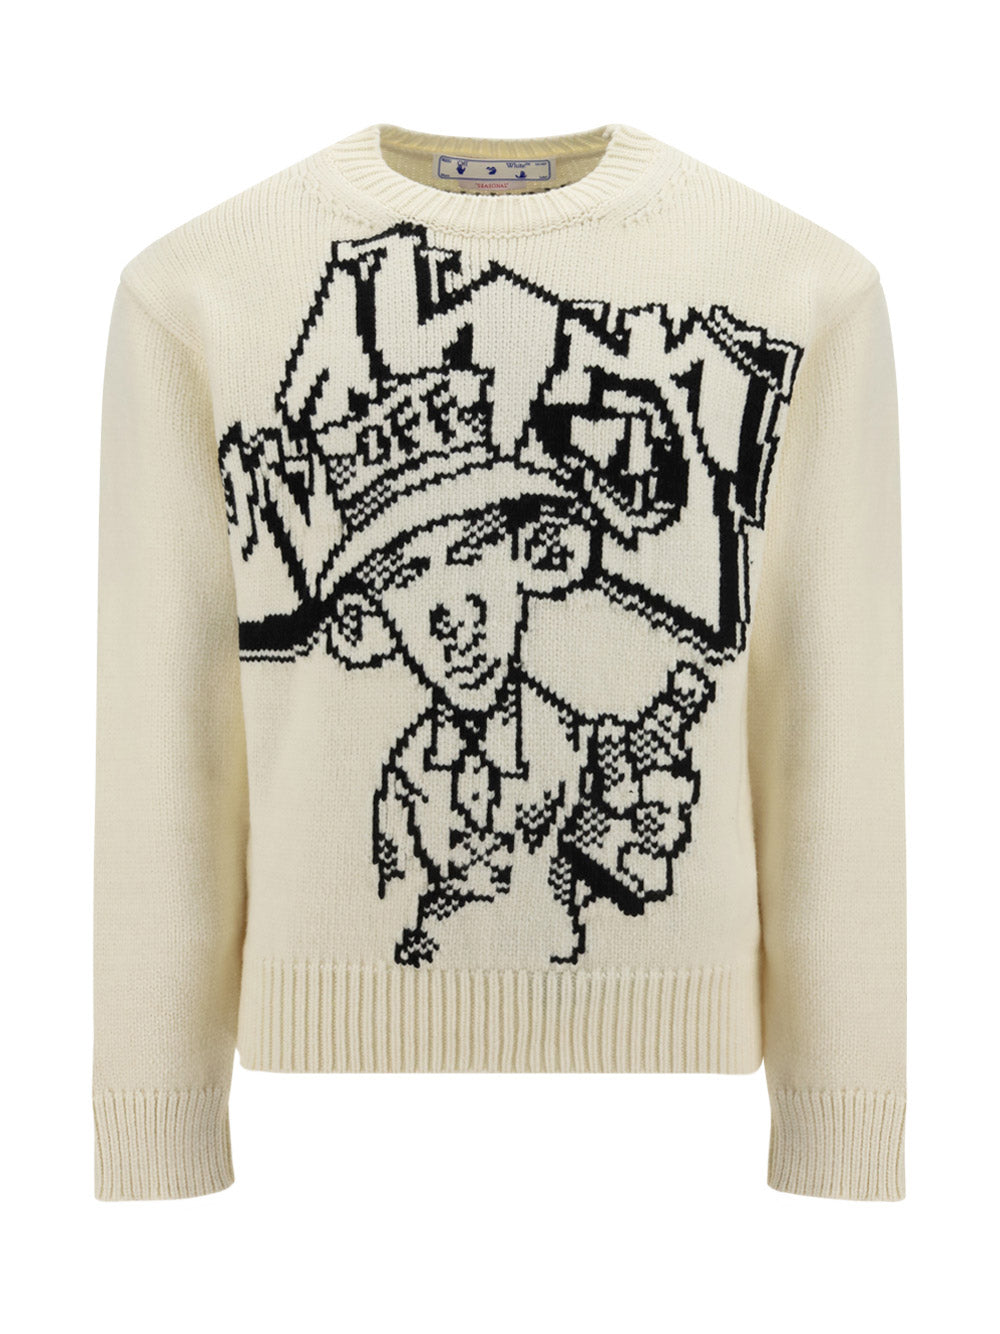 Graff Freest Chunky Knit - Off White